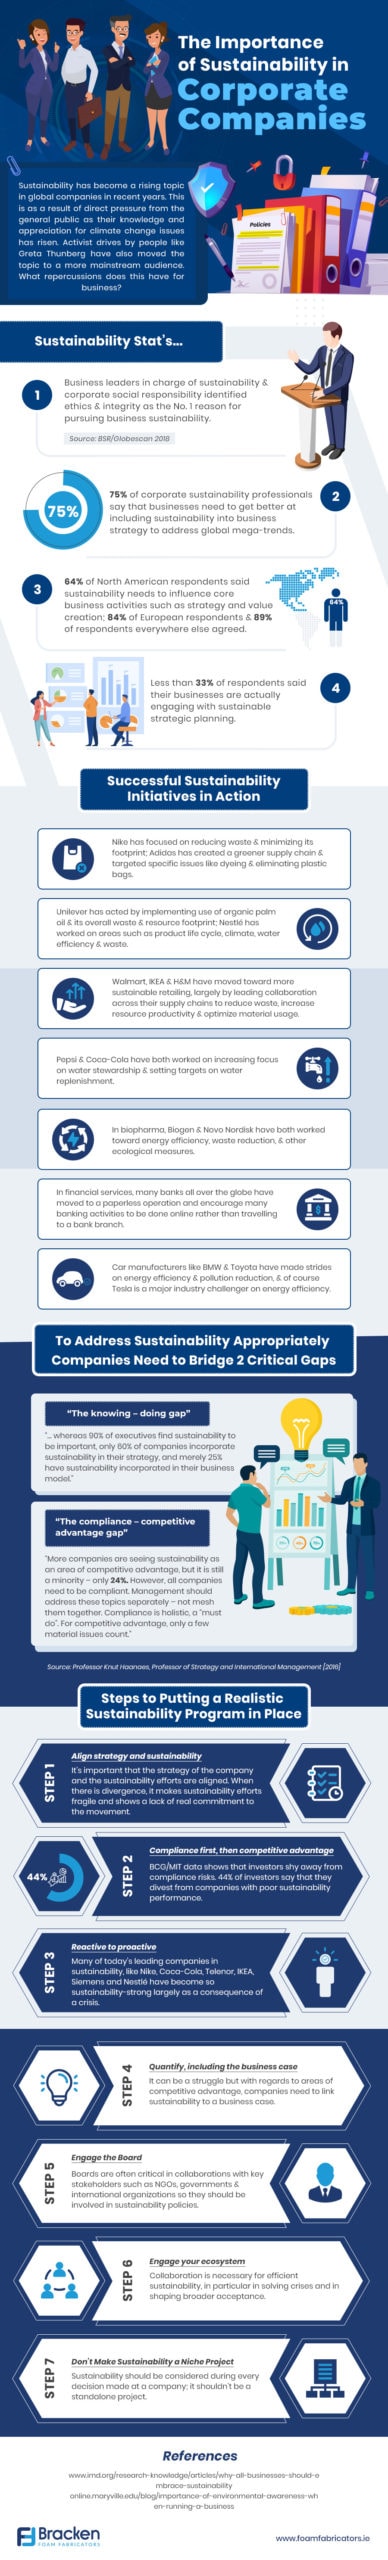 The-Importance-of-Sustainability-in-Corporate-Companies